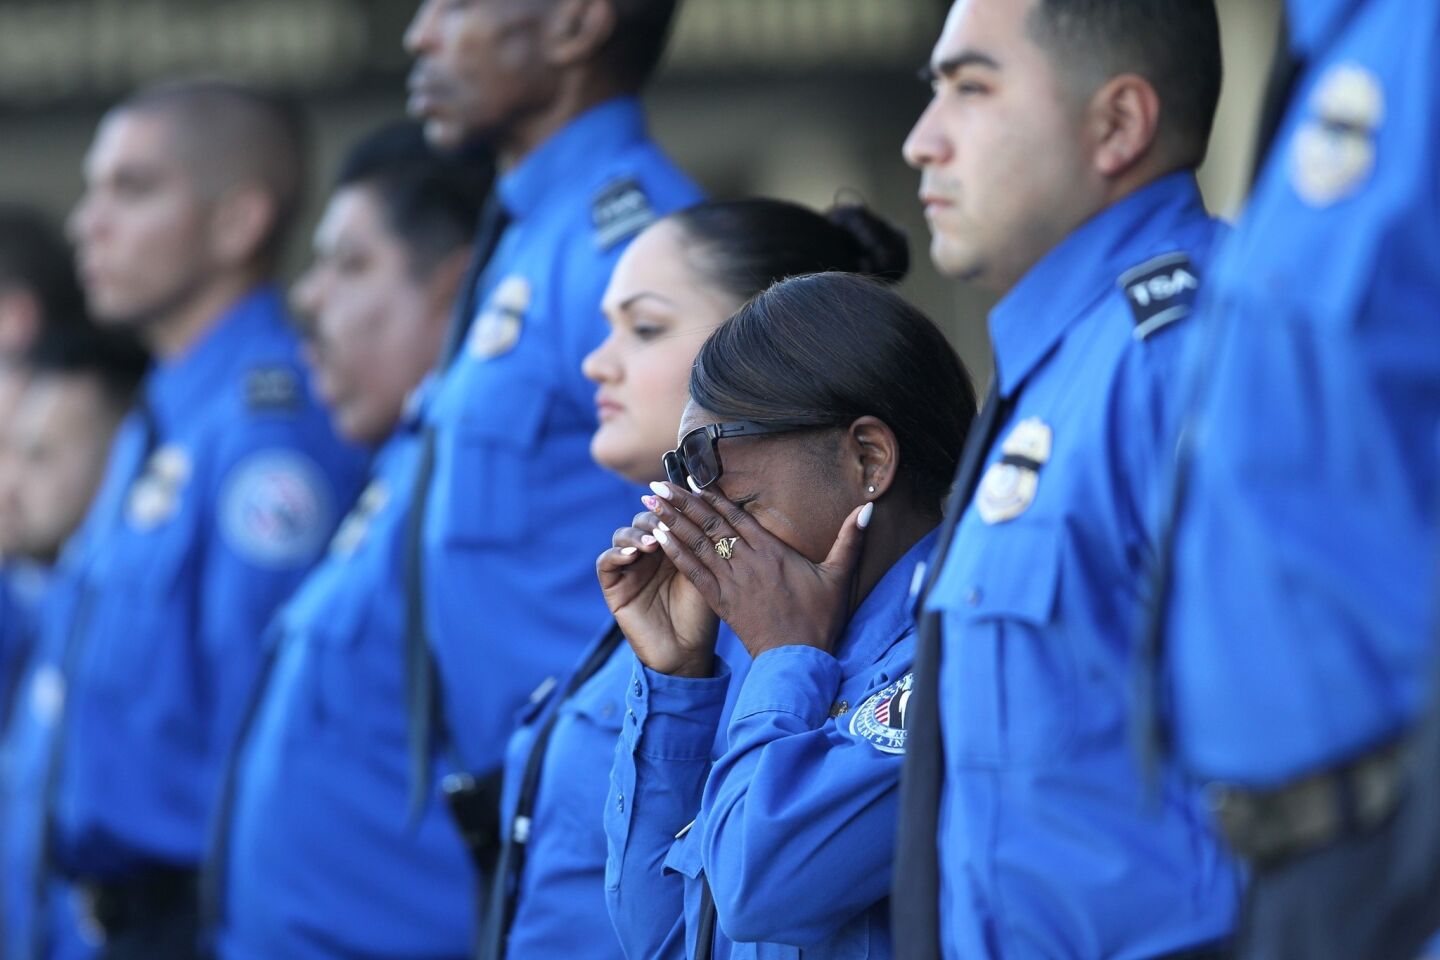 A TSA officer wipes her eyes as an honor guard escorts a U.S. National Honor Flag in a ceremony to memorialize TSA Officer Gerardo Hernandez, who was fatally shot at LAX.